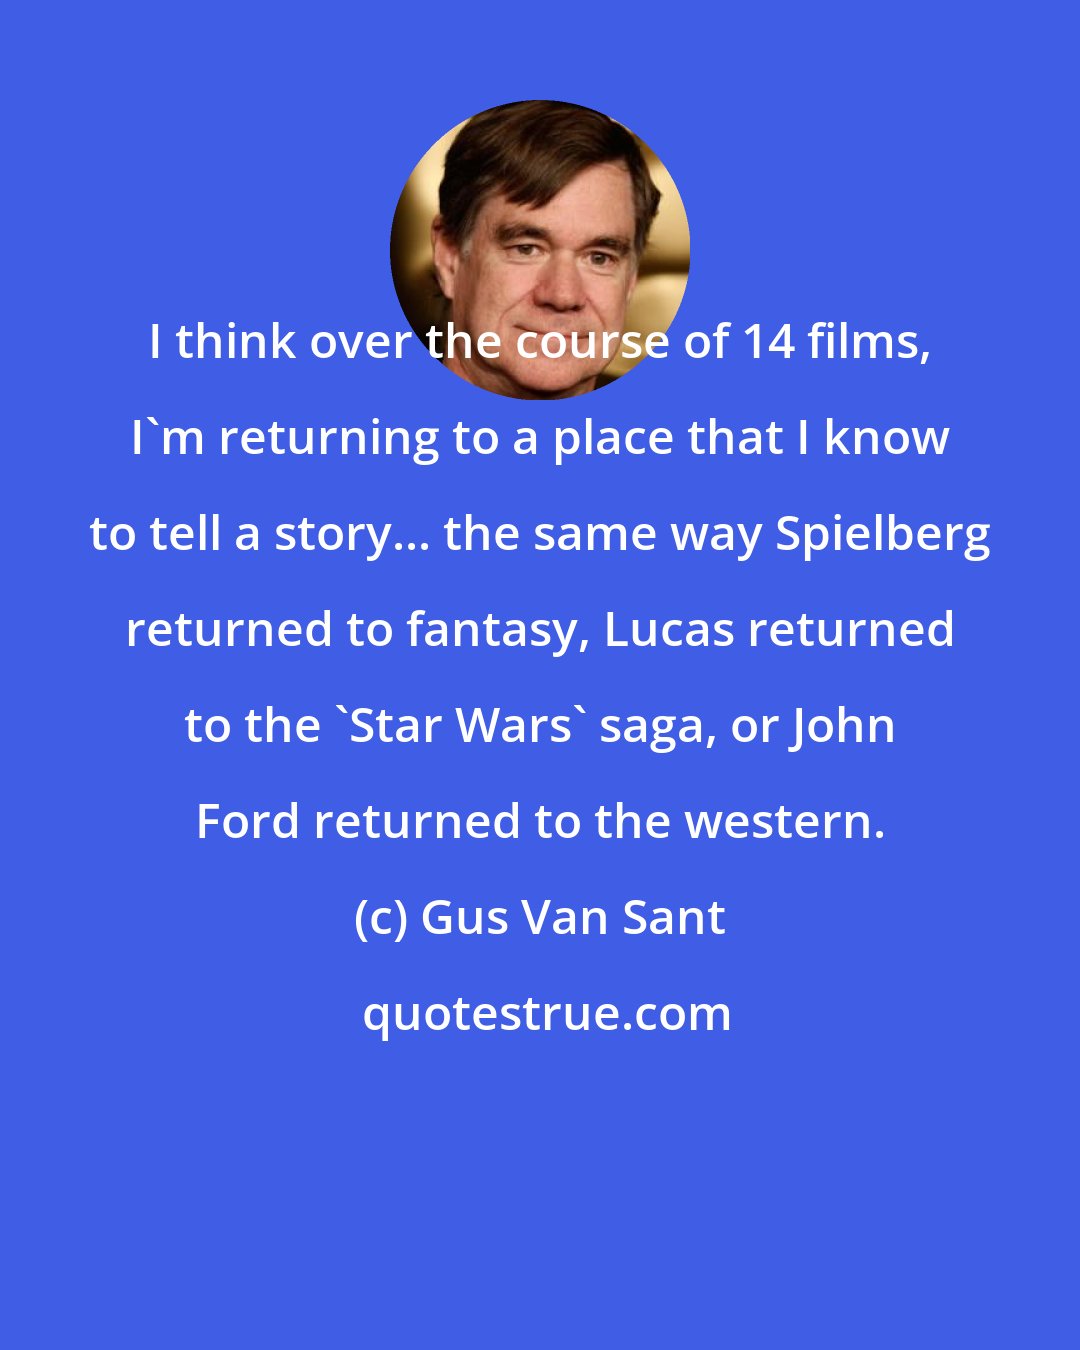 Gus Van Sant: I think over the course of 14 films, I'm returning to a place that I know to tell a story... the same way Spielberg returned to fantasy, Lucas returned to the 'Star Wars' saga, or John Ford returned to the western.